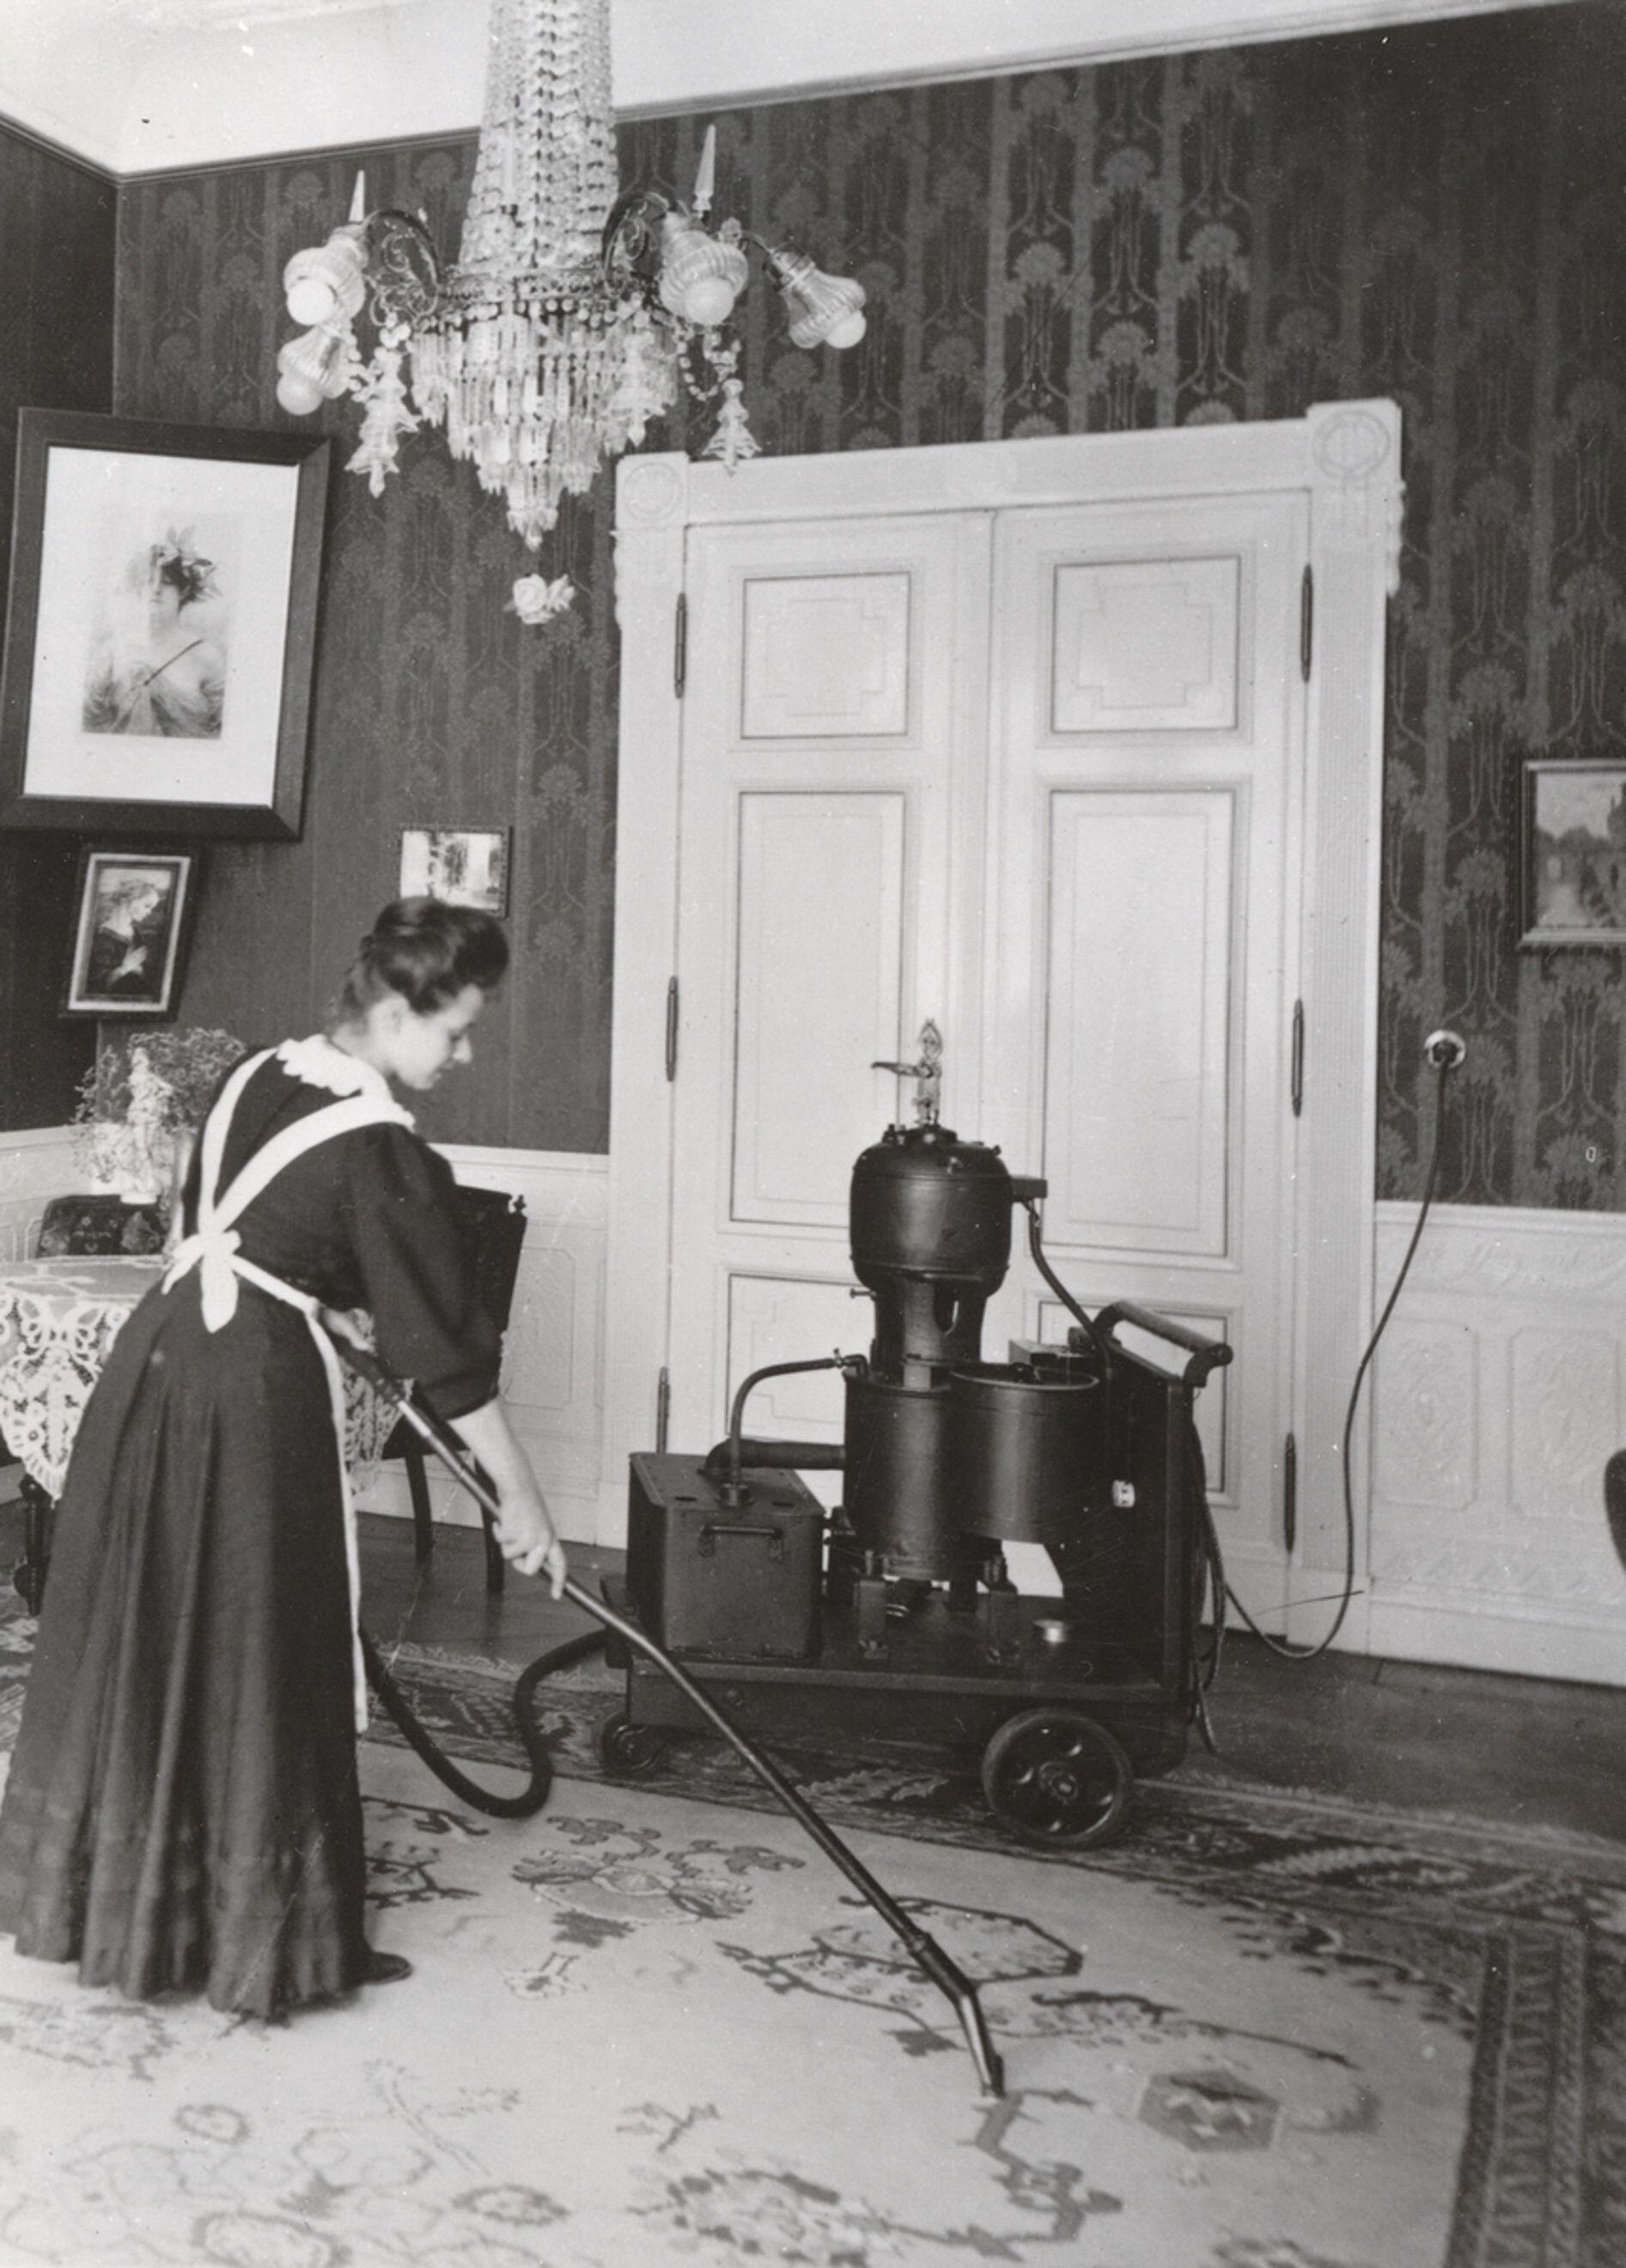 A woman in a long dress and apron vacuuming with a long attachment connected to what looks like a small steam engine